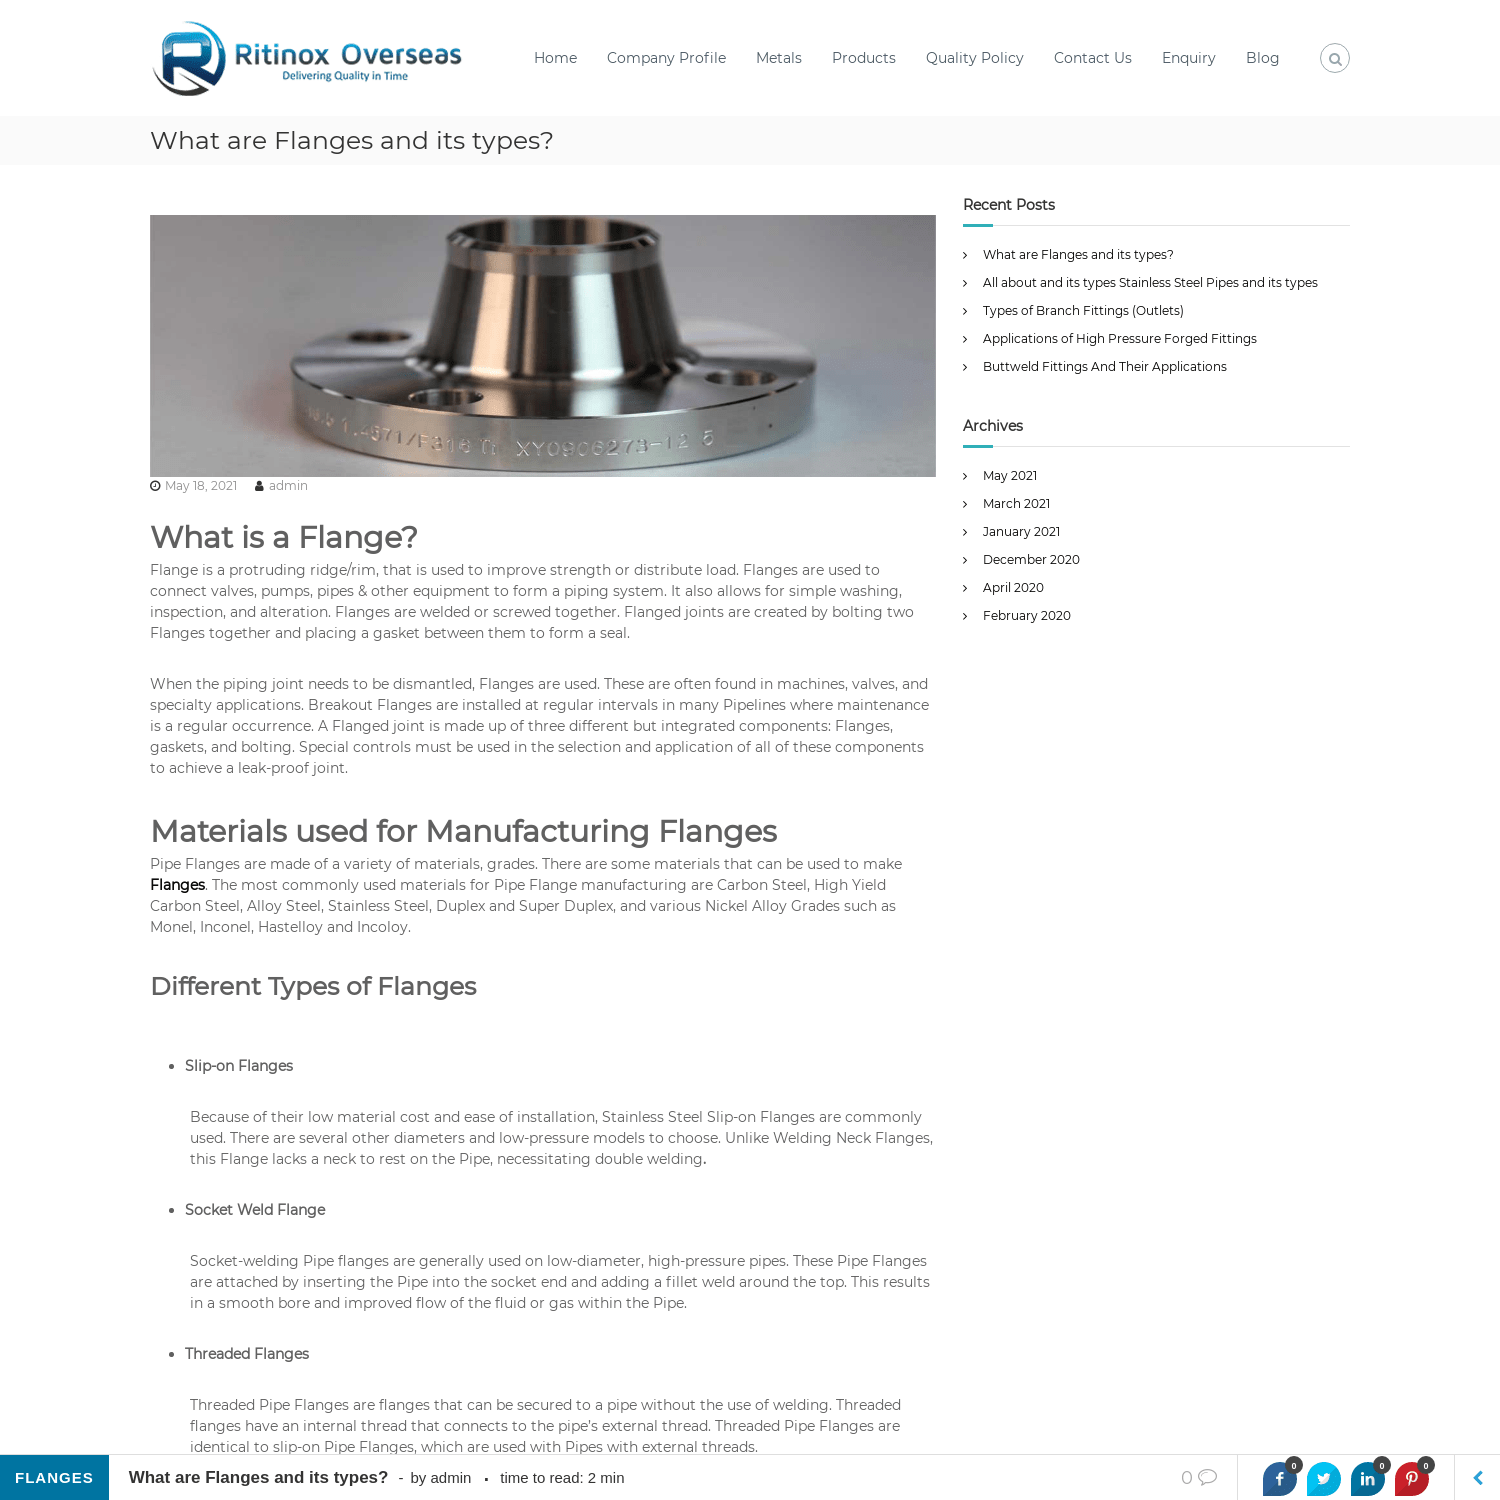 What are Flanges and its types?